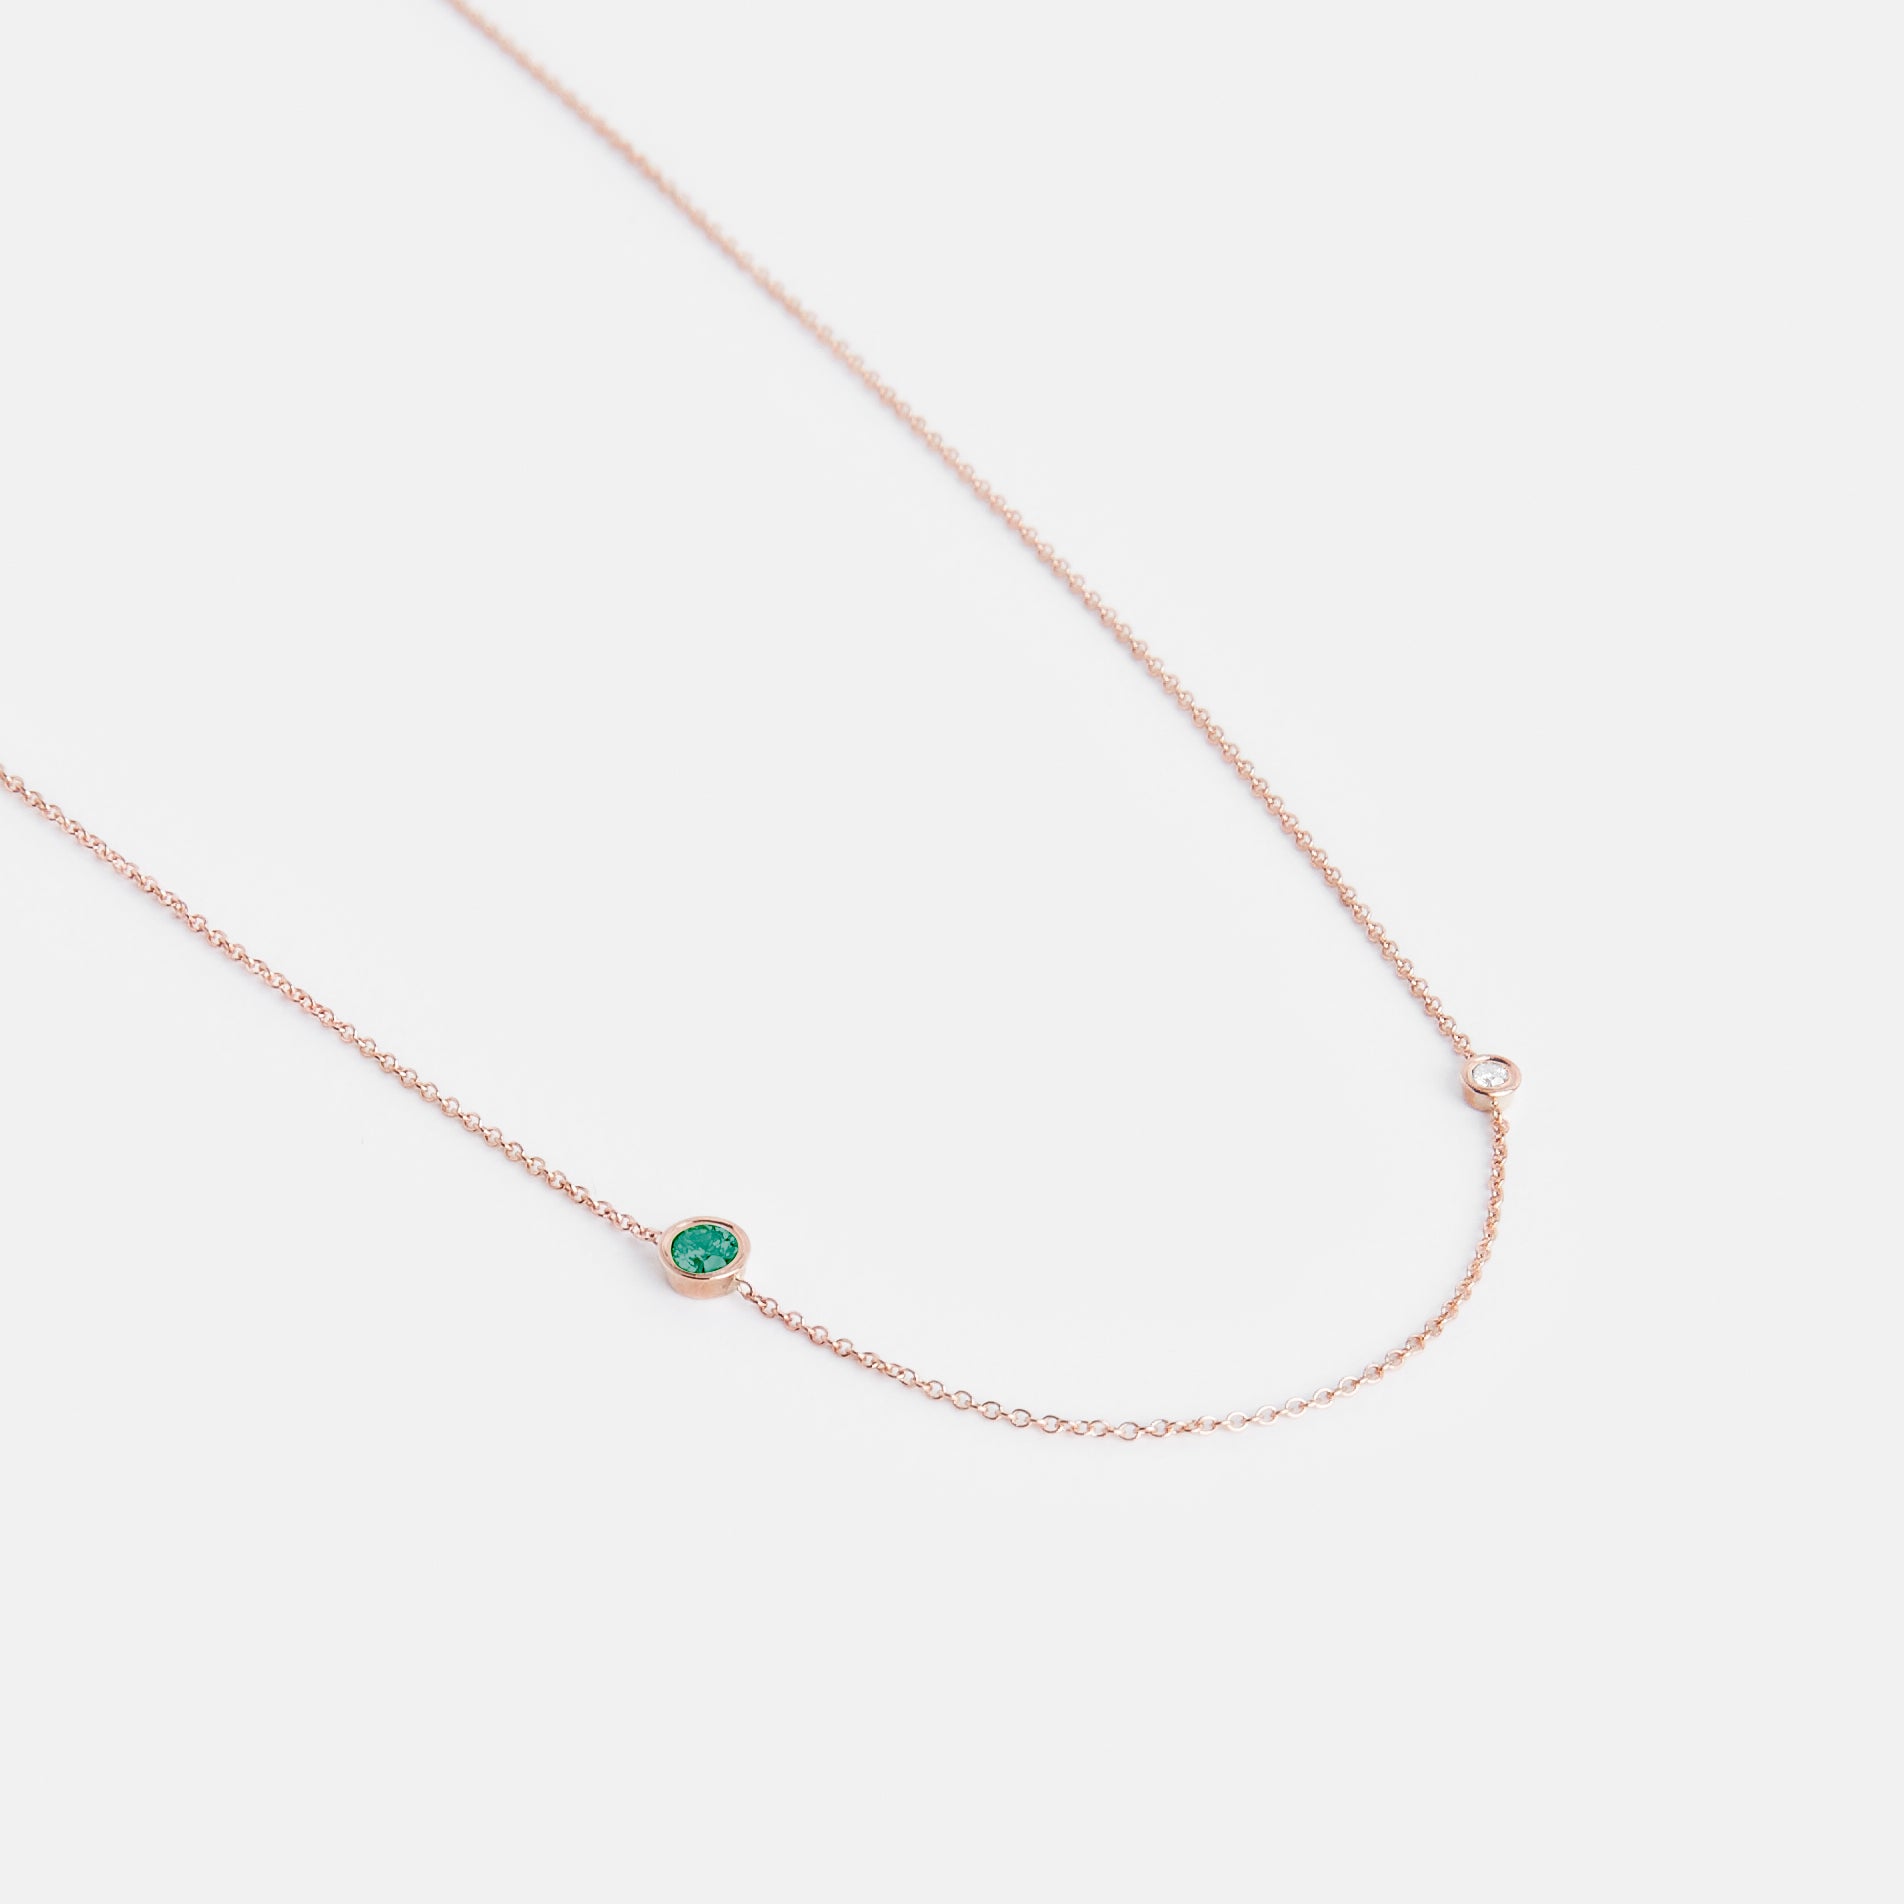 Iba Designer Necklace in 14k Rose Gold set with Emerald and White Diamond By SHW Fine Jewelry NYC